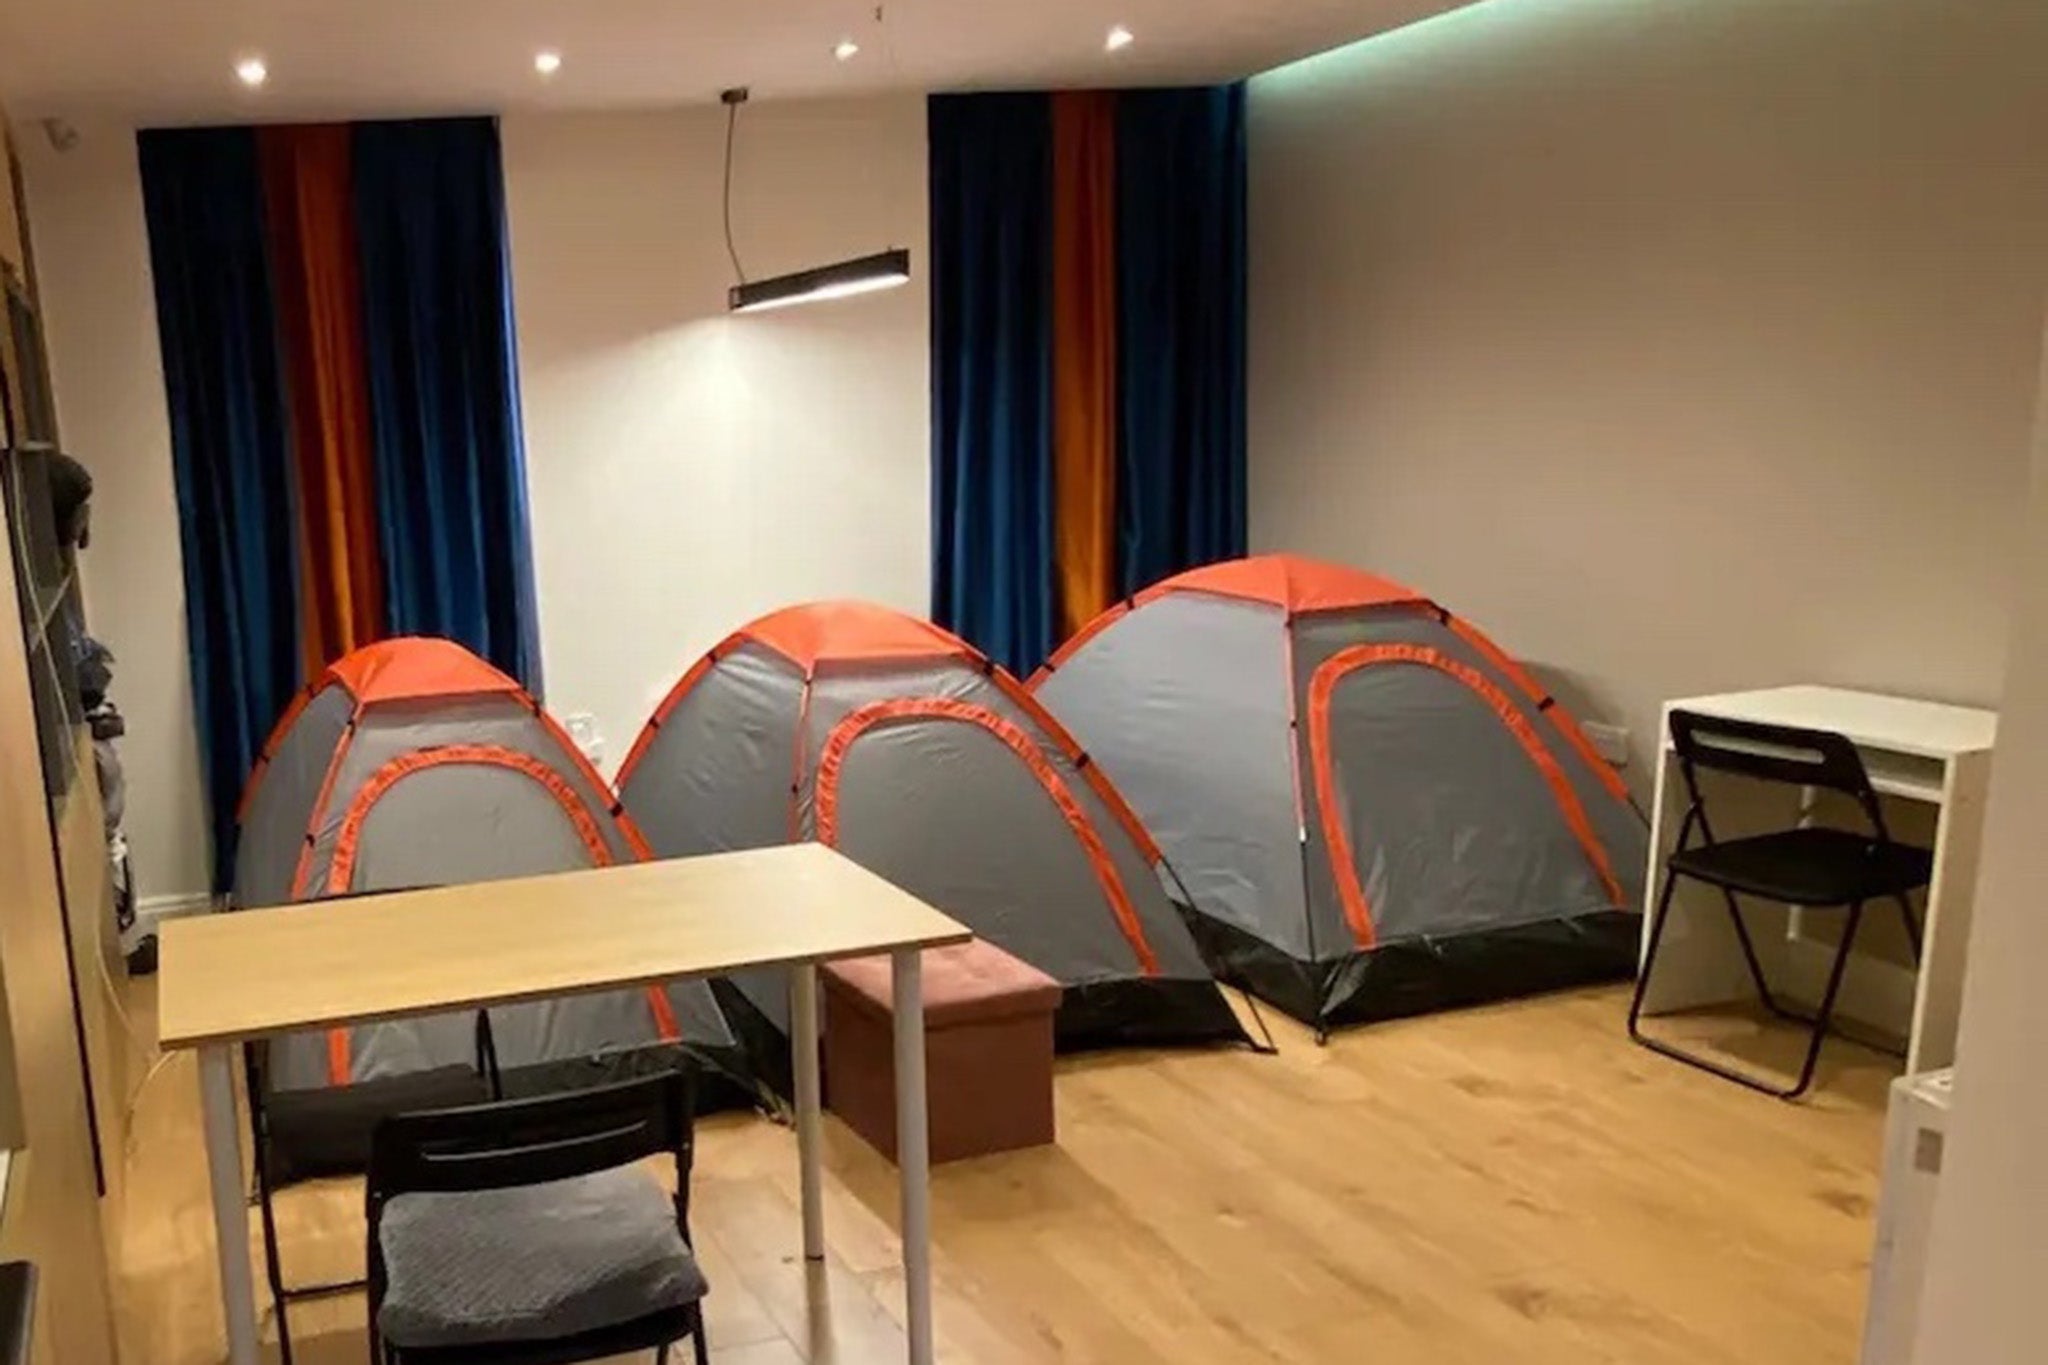 Room without a view: The Airbnb tents in central London